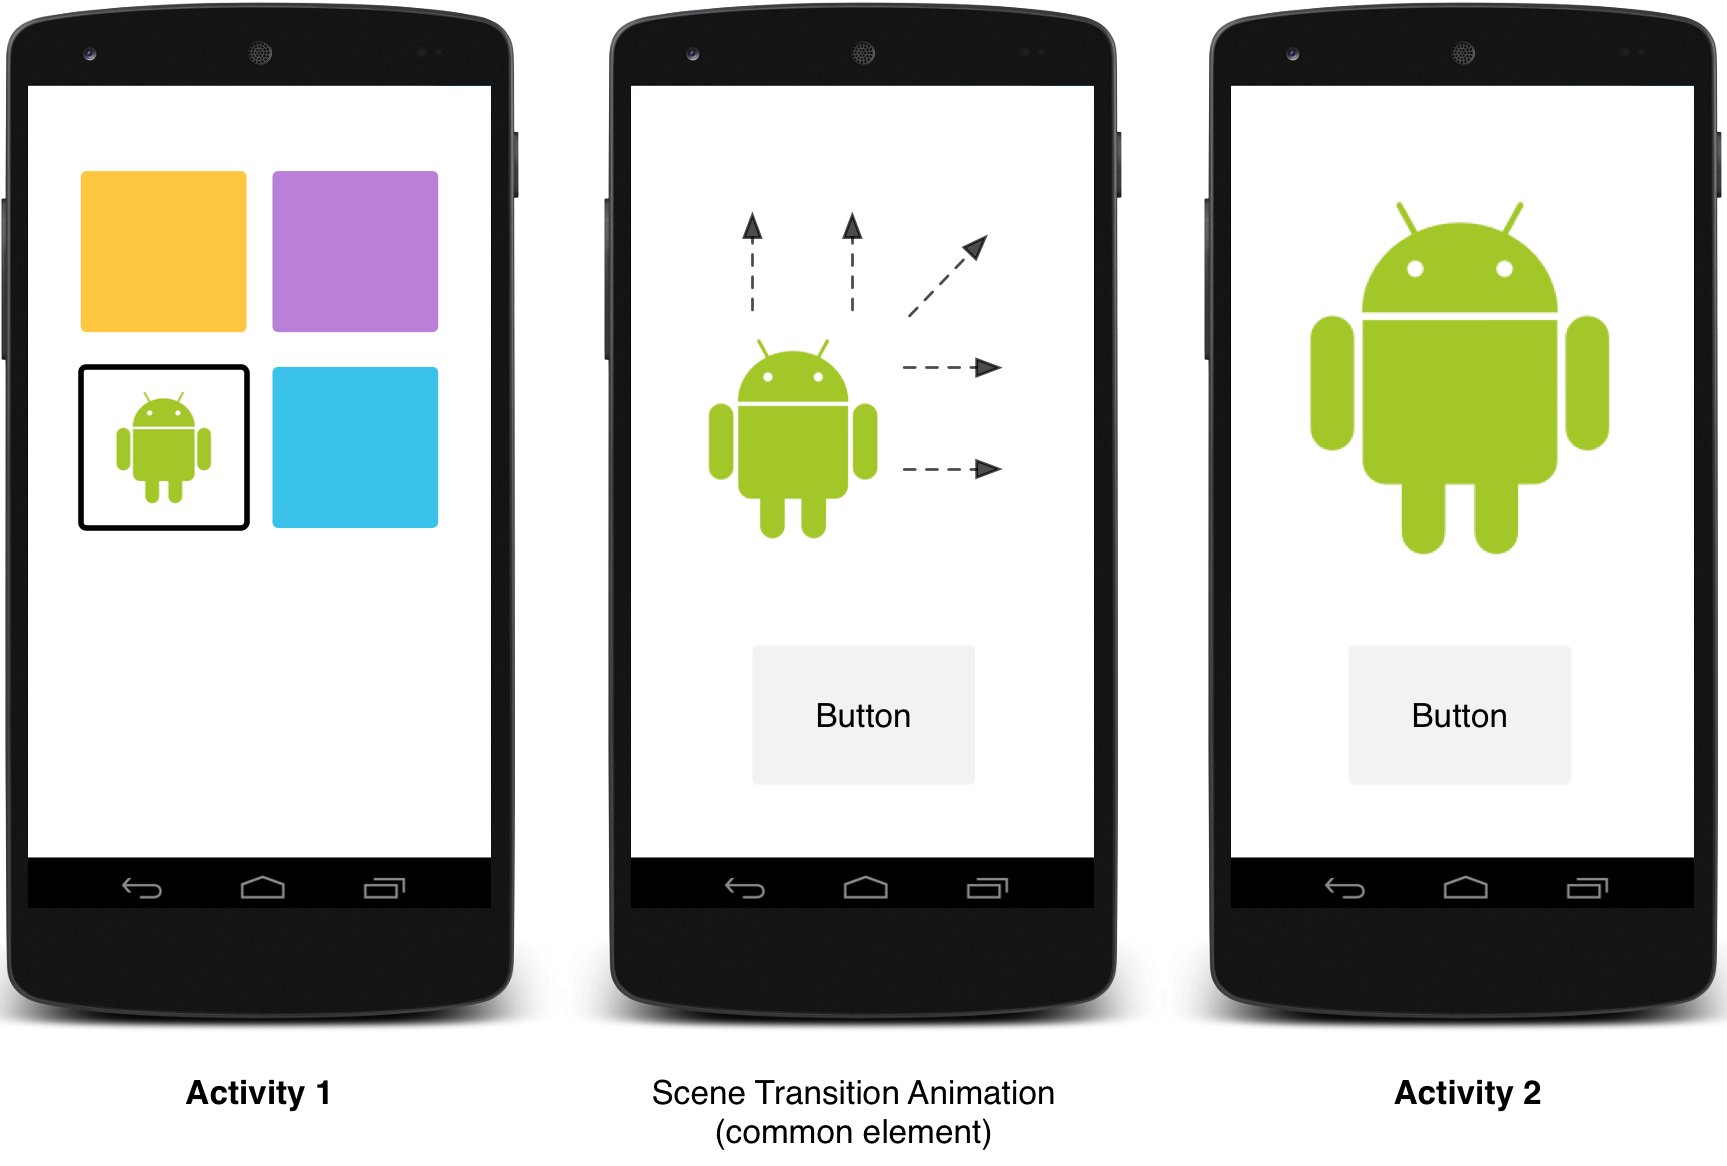 Start an activity using an animation | Android Developers